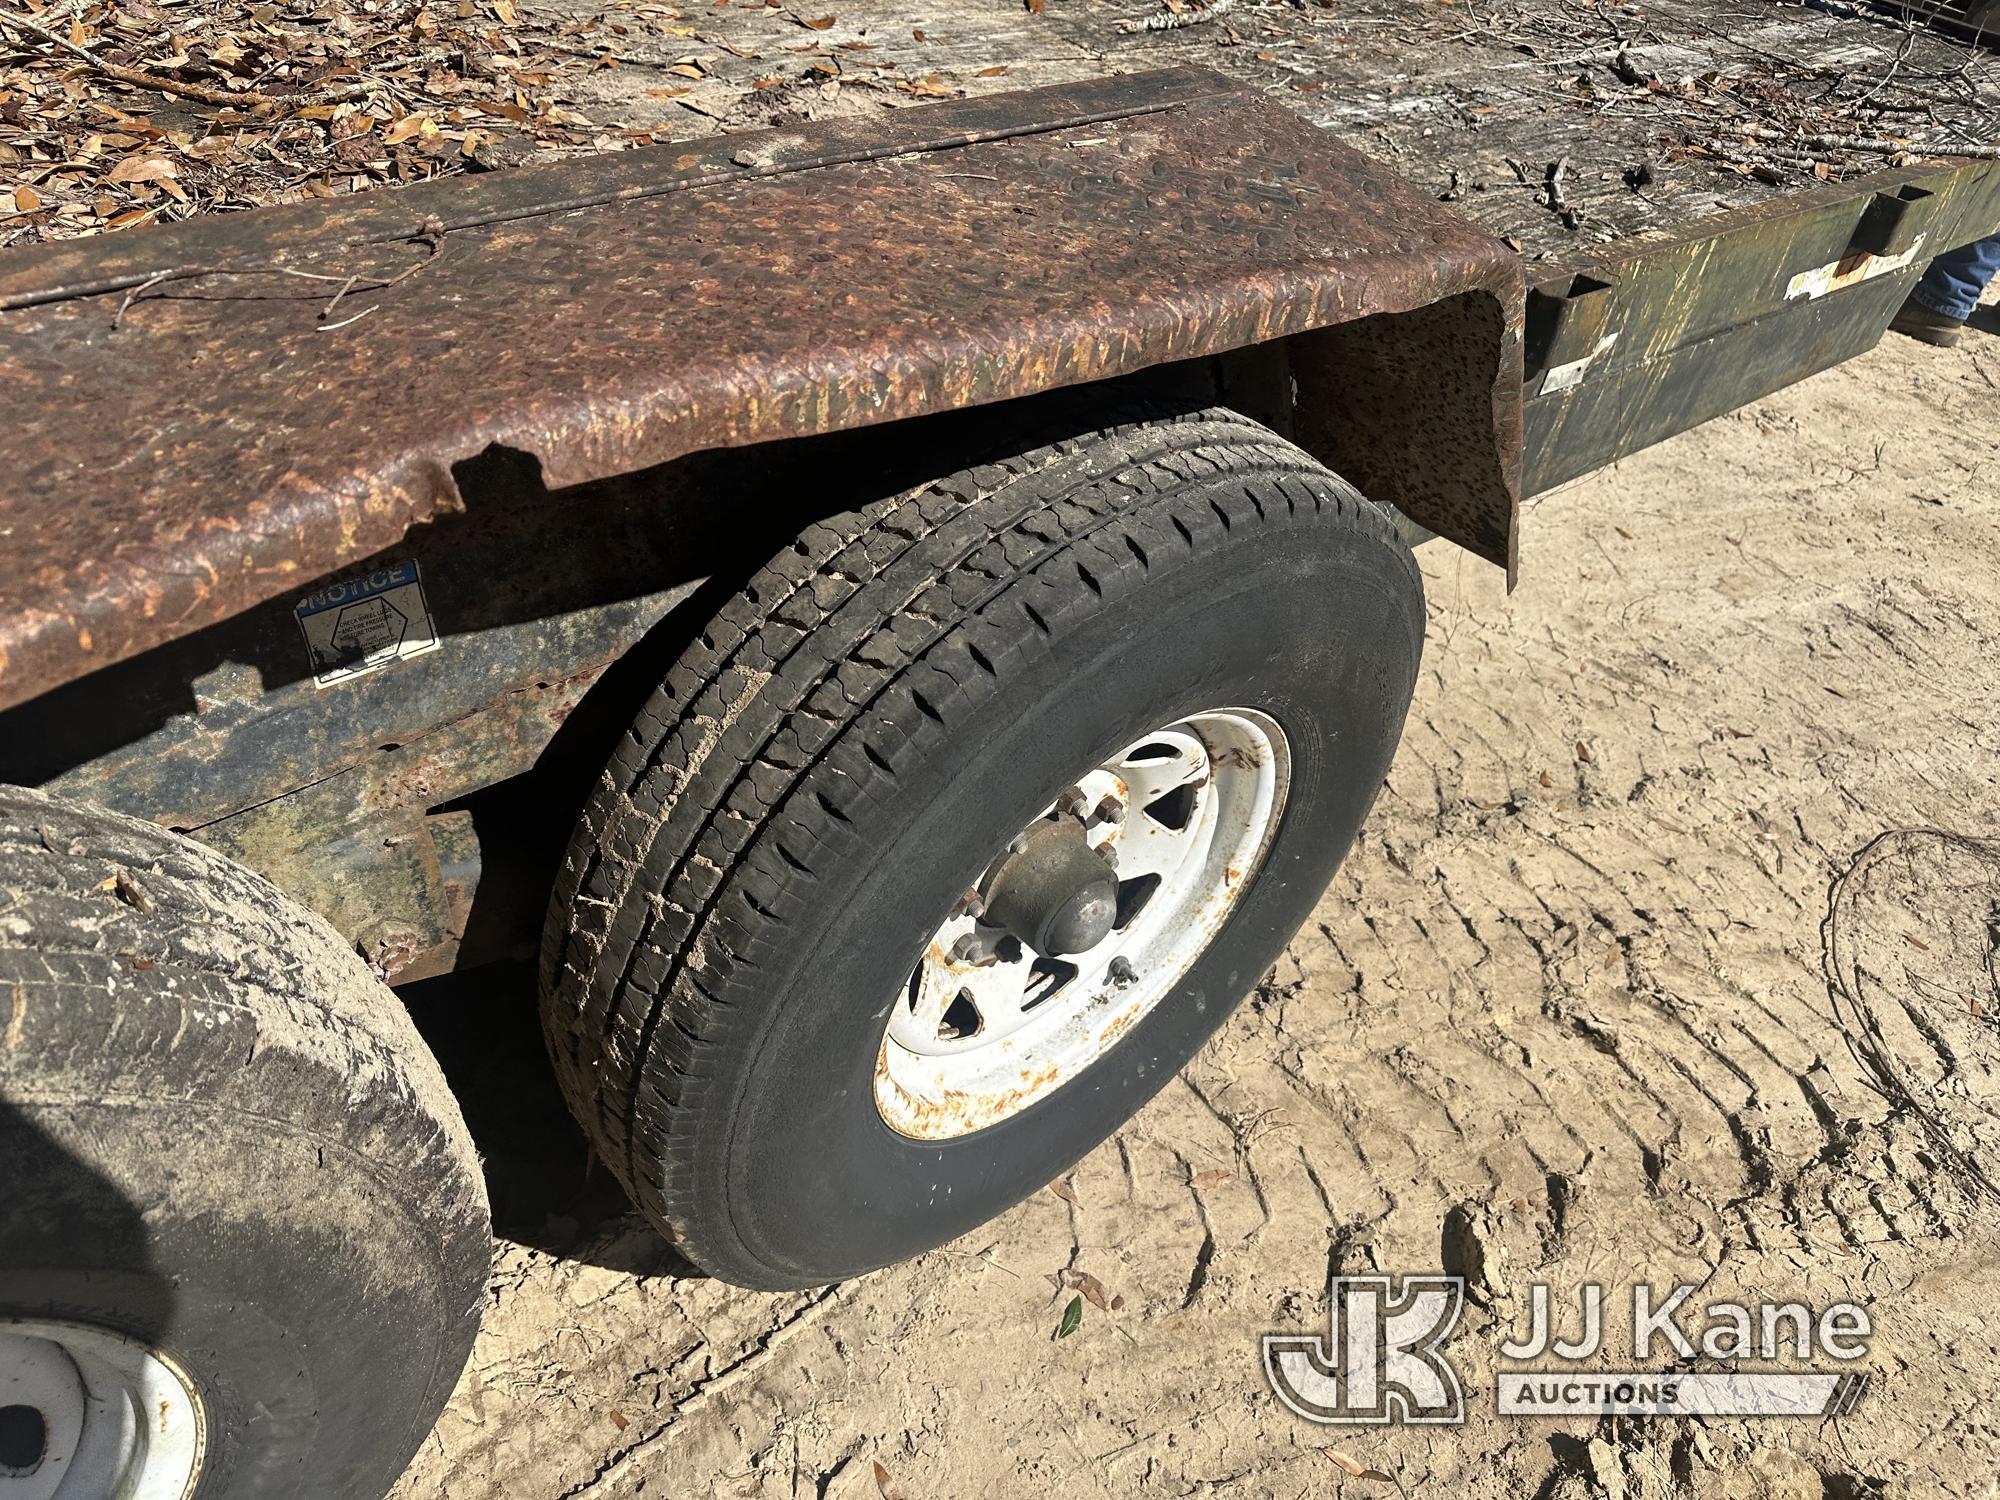 (Pensacola, FL) 2000 Anderson 10-Ton T/A Tagalong Trailer No Title) (Rust Damage, Missing Ramps